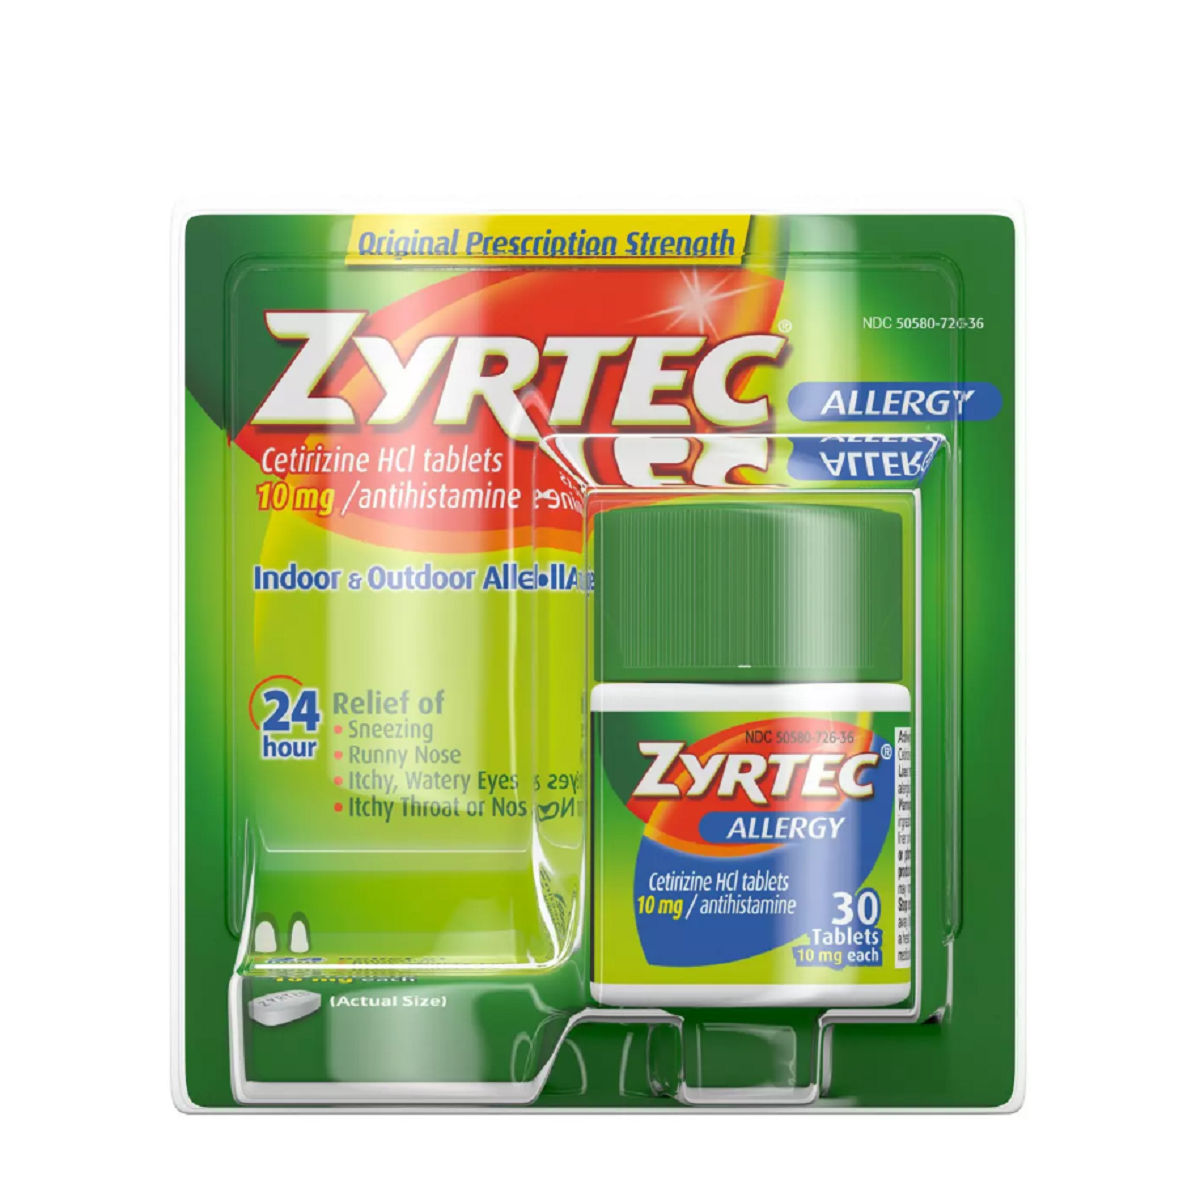 Zyrtec Allergy Tablets, Adult ZYRTEC or Children's ZYRTEC Coupon